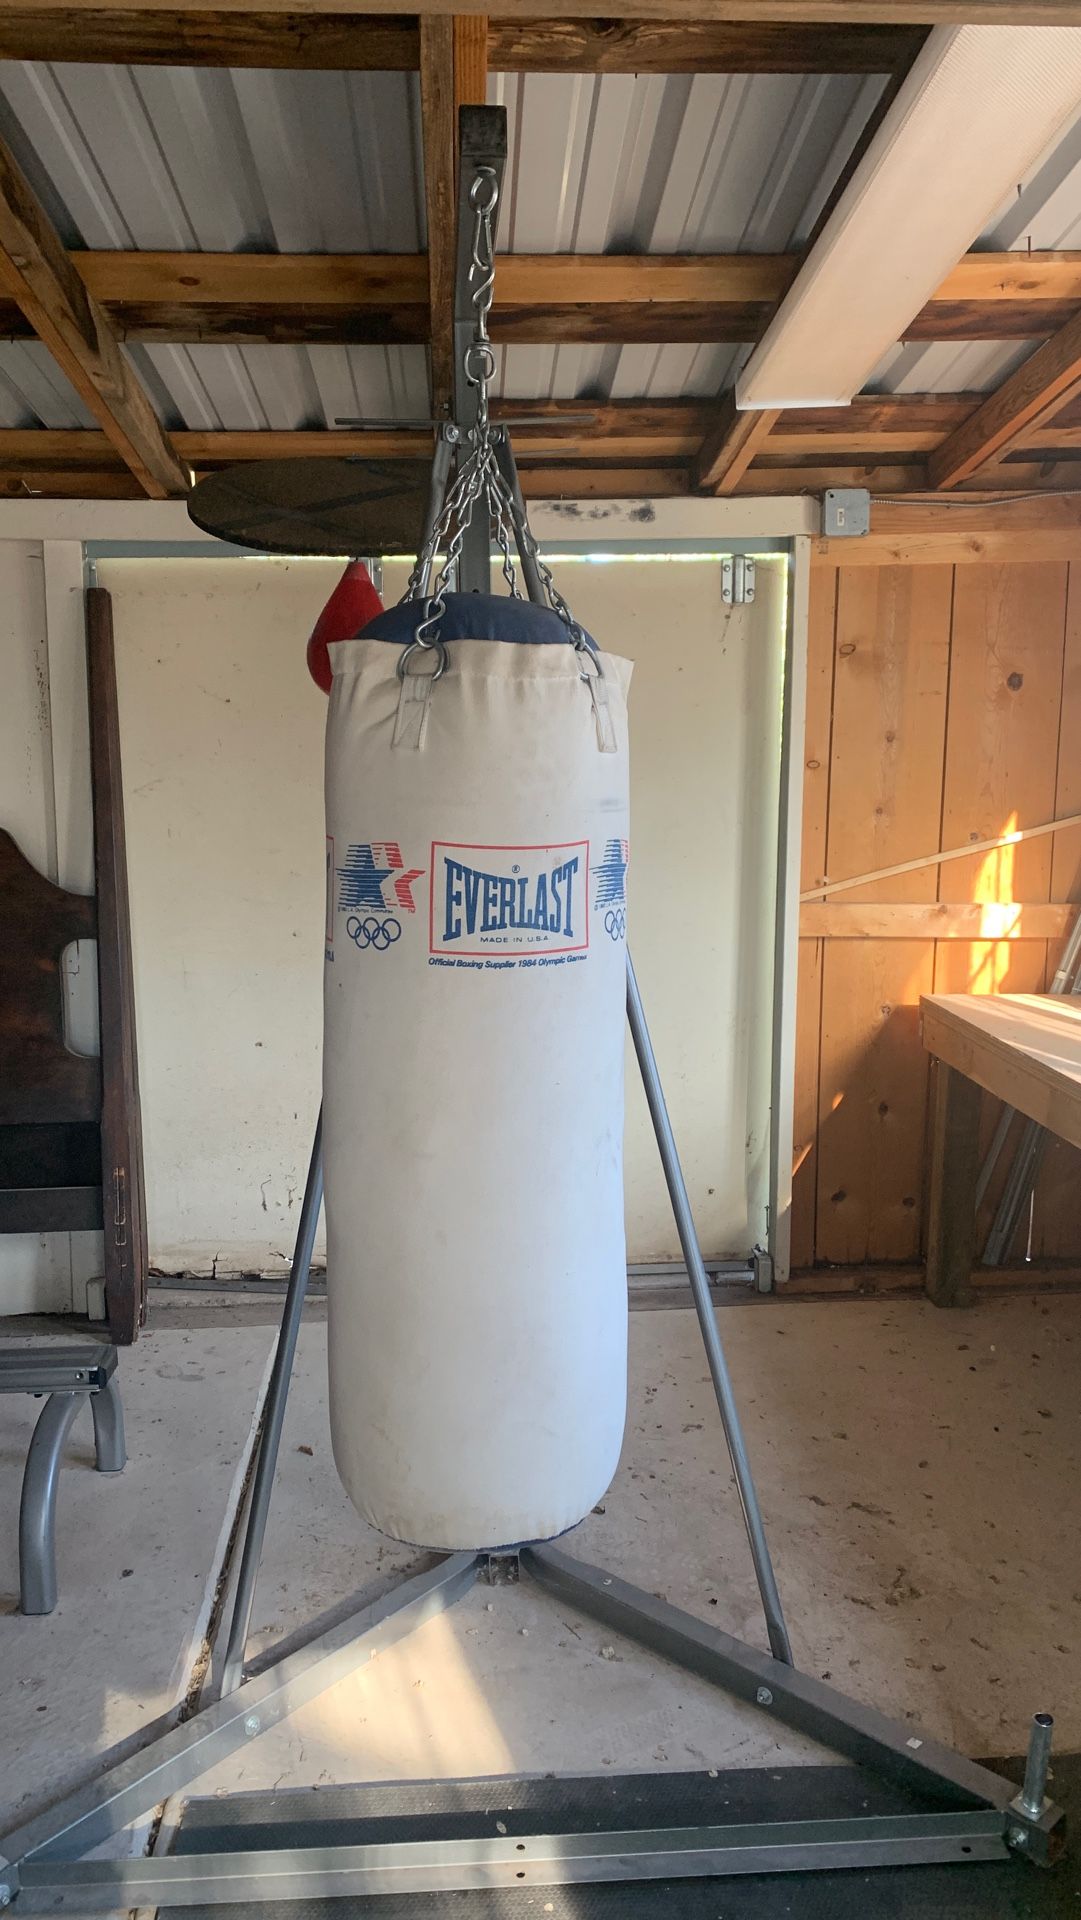 Everlast punching bag great condition $75 obo needs to be gone in next few hours I’m in process of moving .